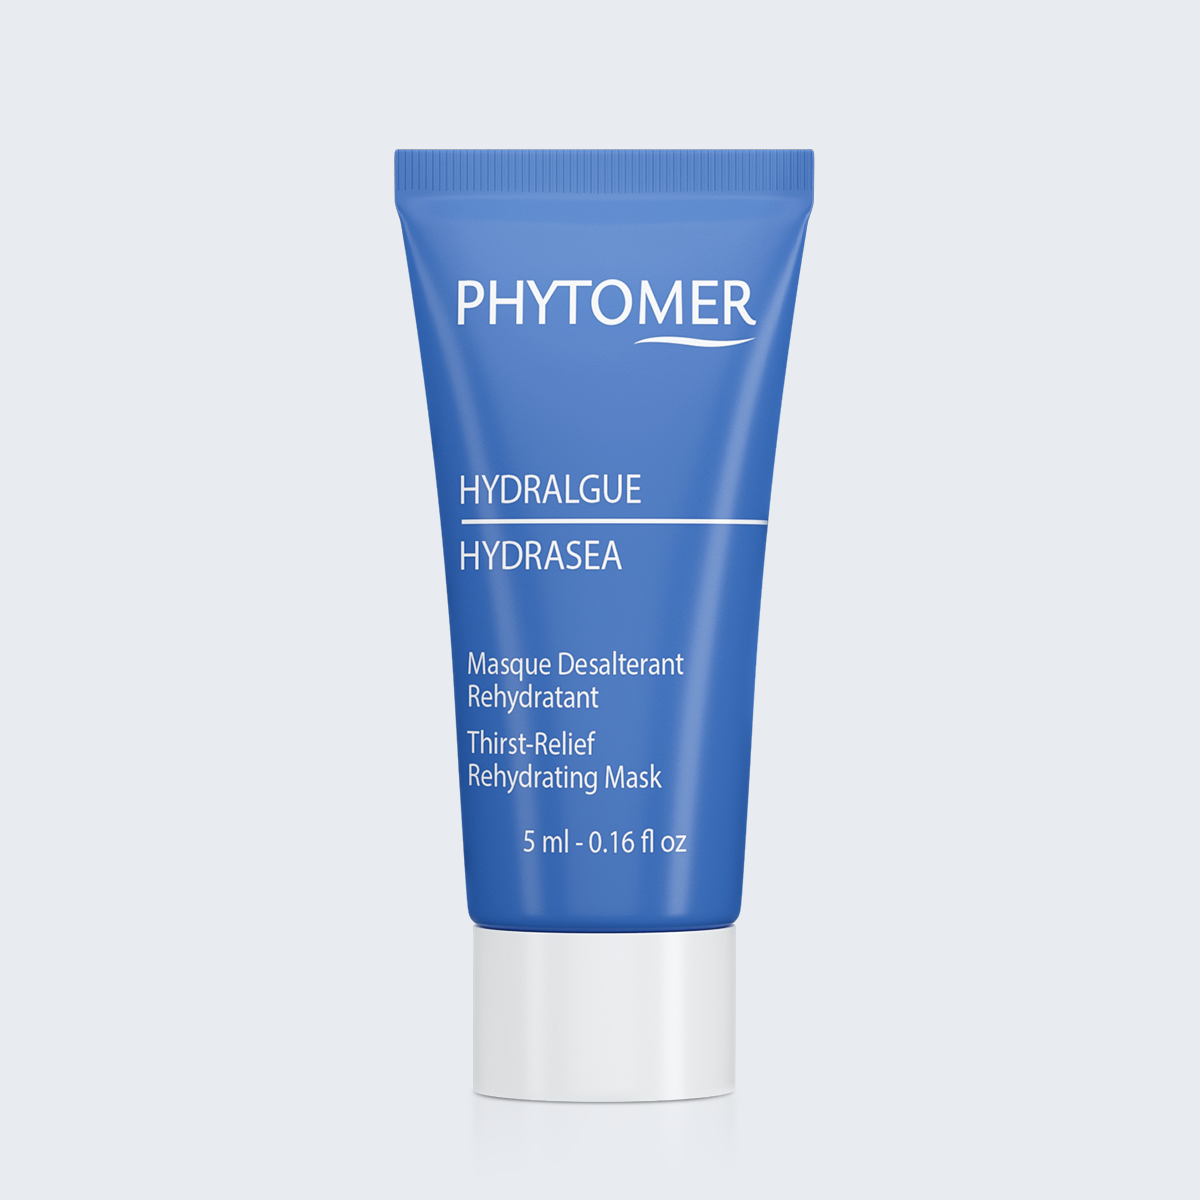 SAMPLE: PHYTOMER HYDRASEA THIRST-RELIEF REHYDRATING MASK